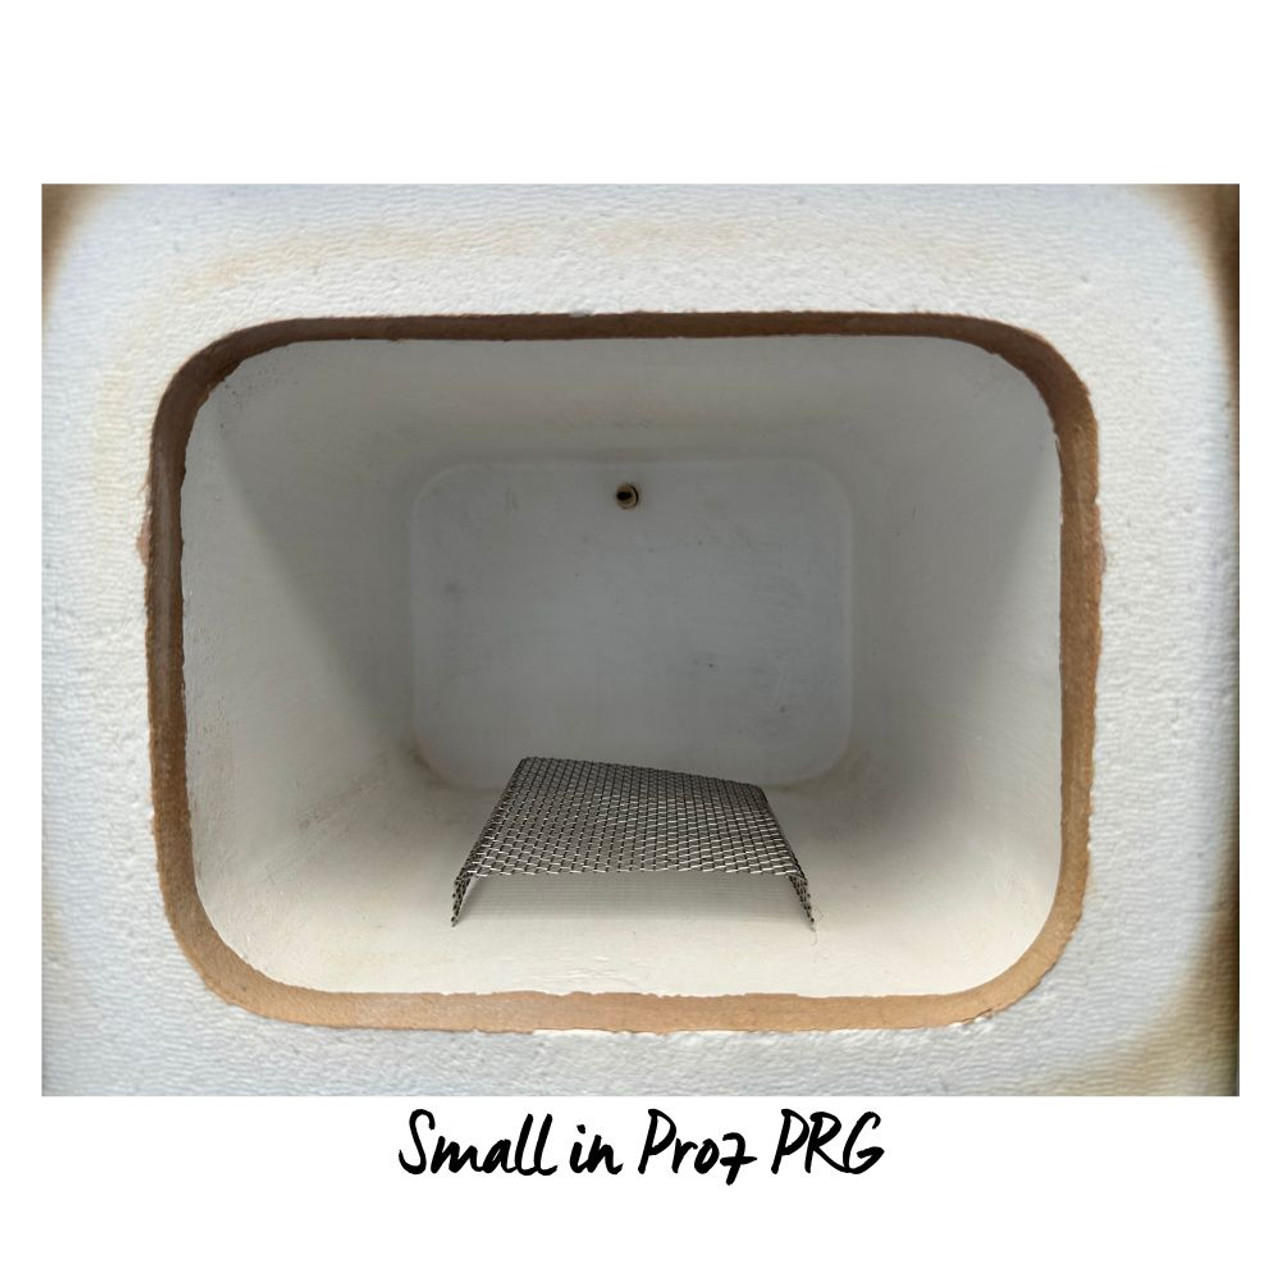 Small Mesh in Pro 7 PRG